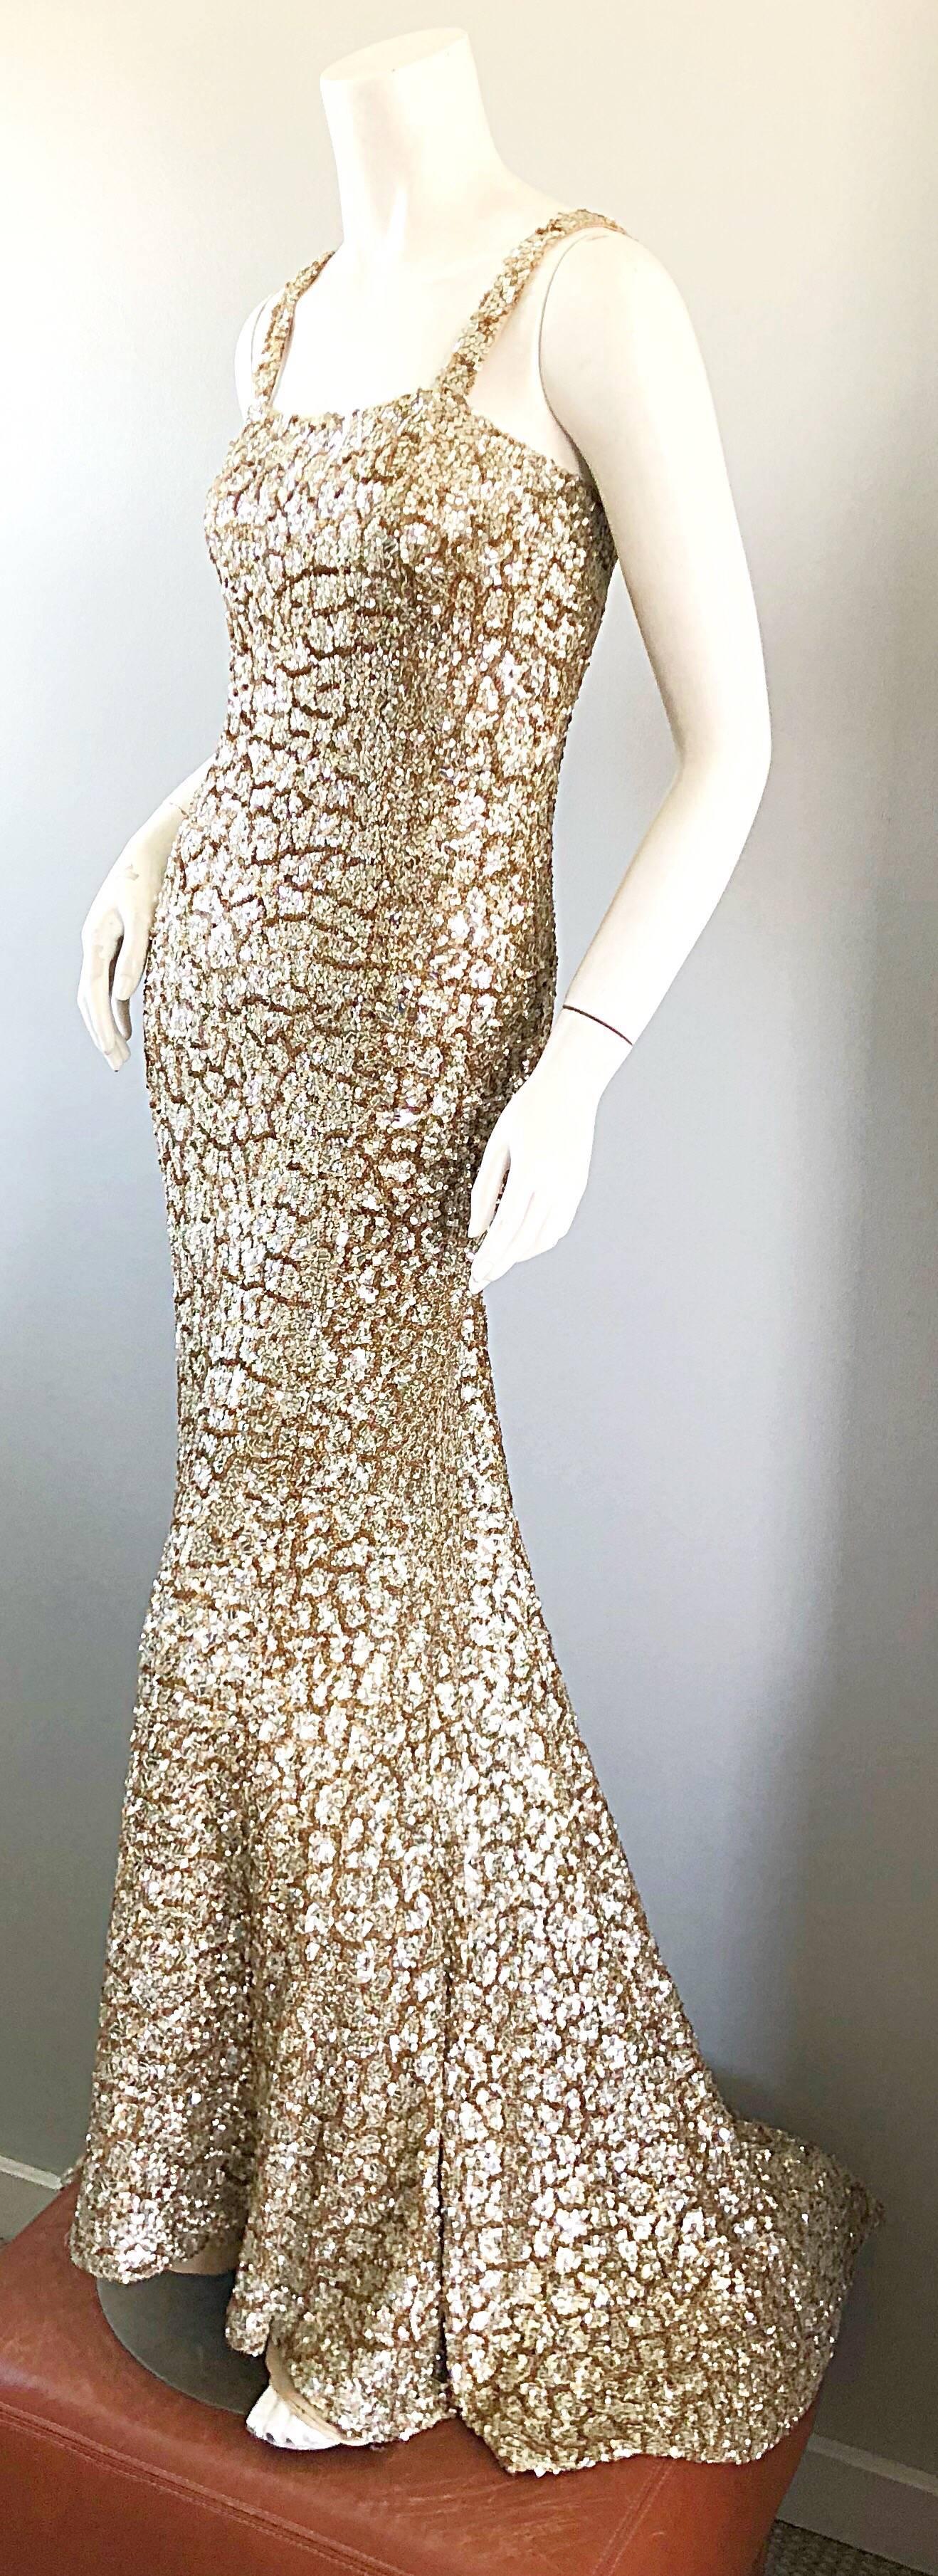 Monique Lhuillier Gorgeous Resort 2012 Gold Rose Gold Full Sequin Trained Gown  1